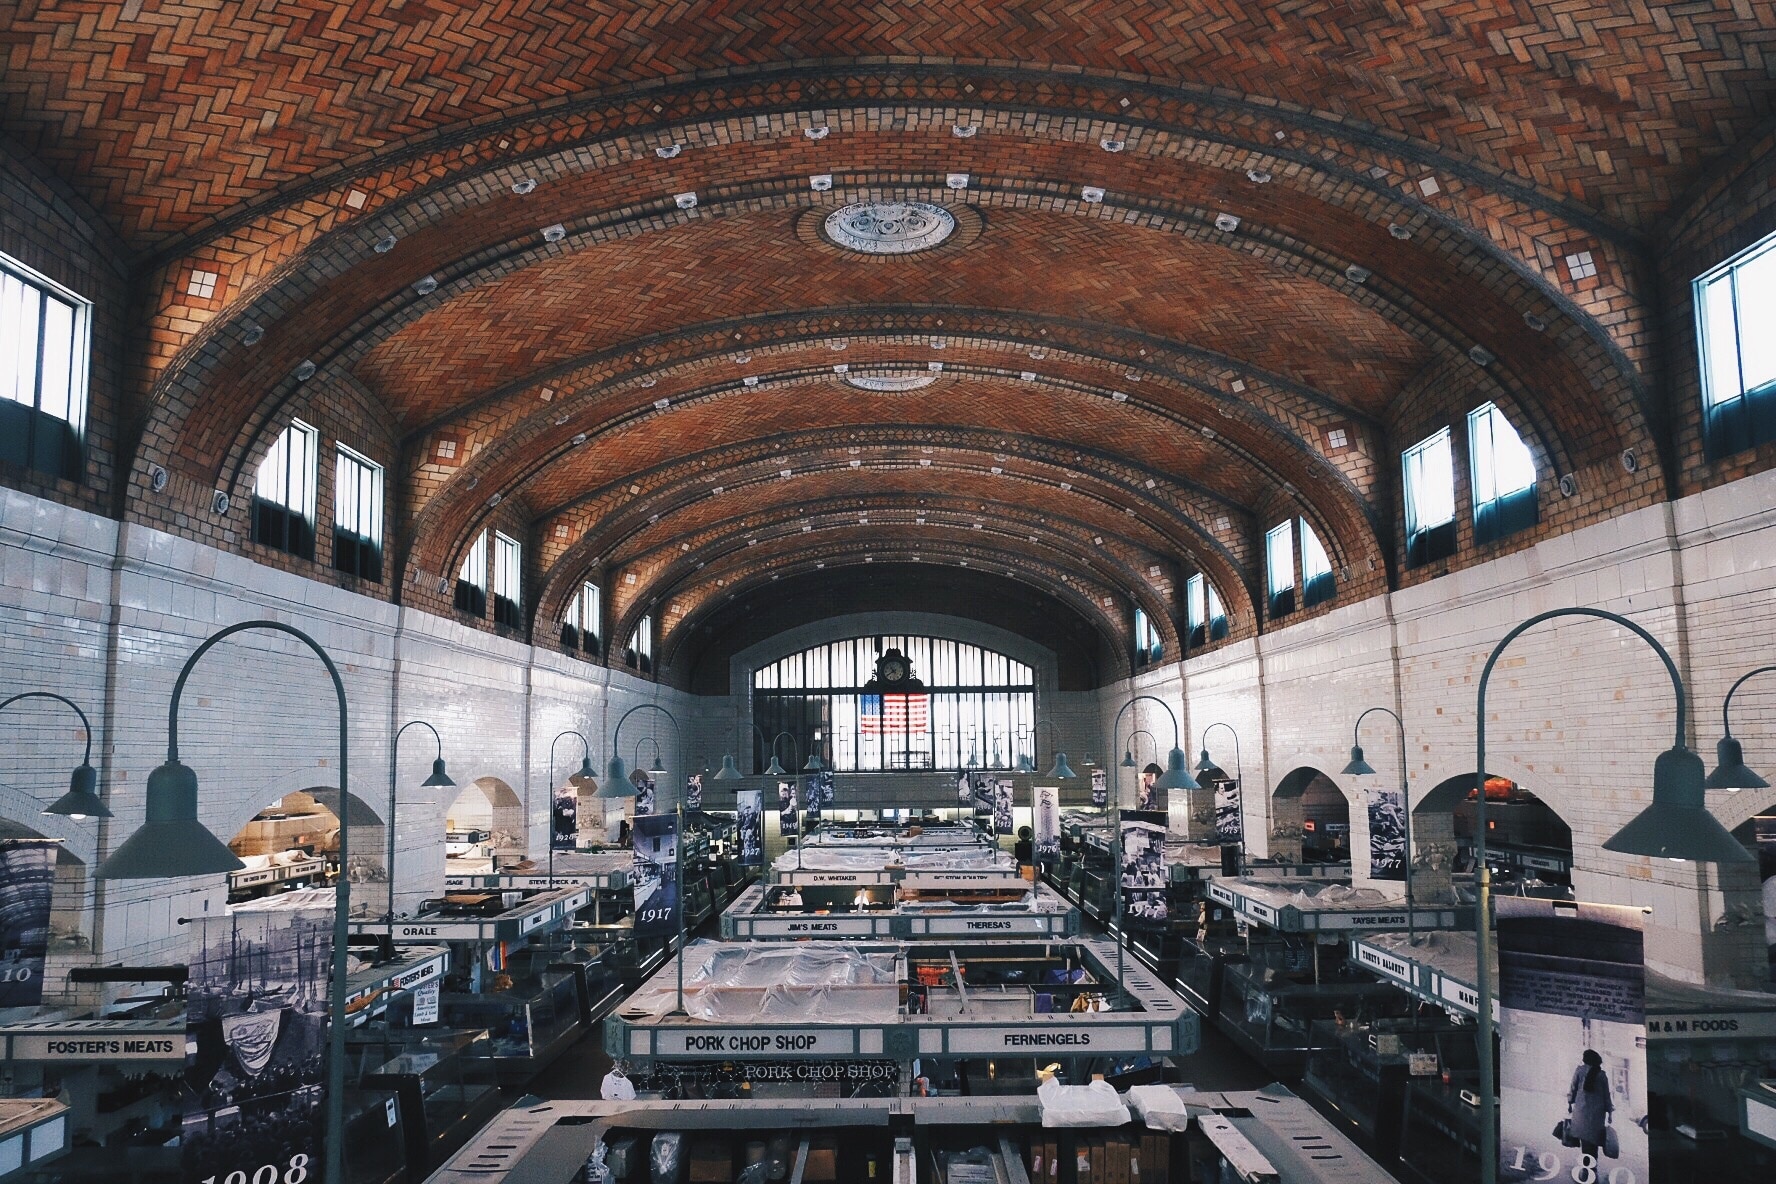 The West Side Market is the oldest marketplace in Ohio (est. 1912). This shot shows an empty Market on its off day. I imagined each era that have walked these very floors and what it was like during major historical events that shook the foundations of our country. #Architecture